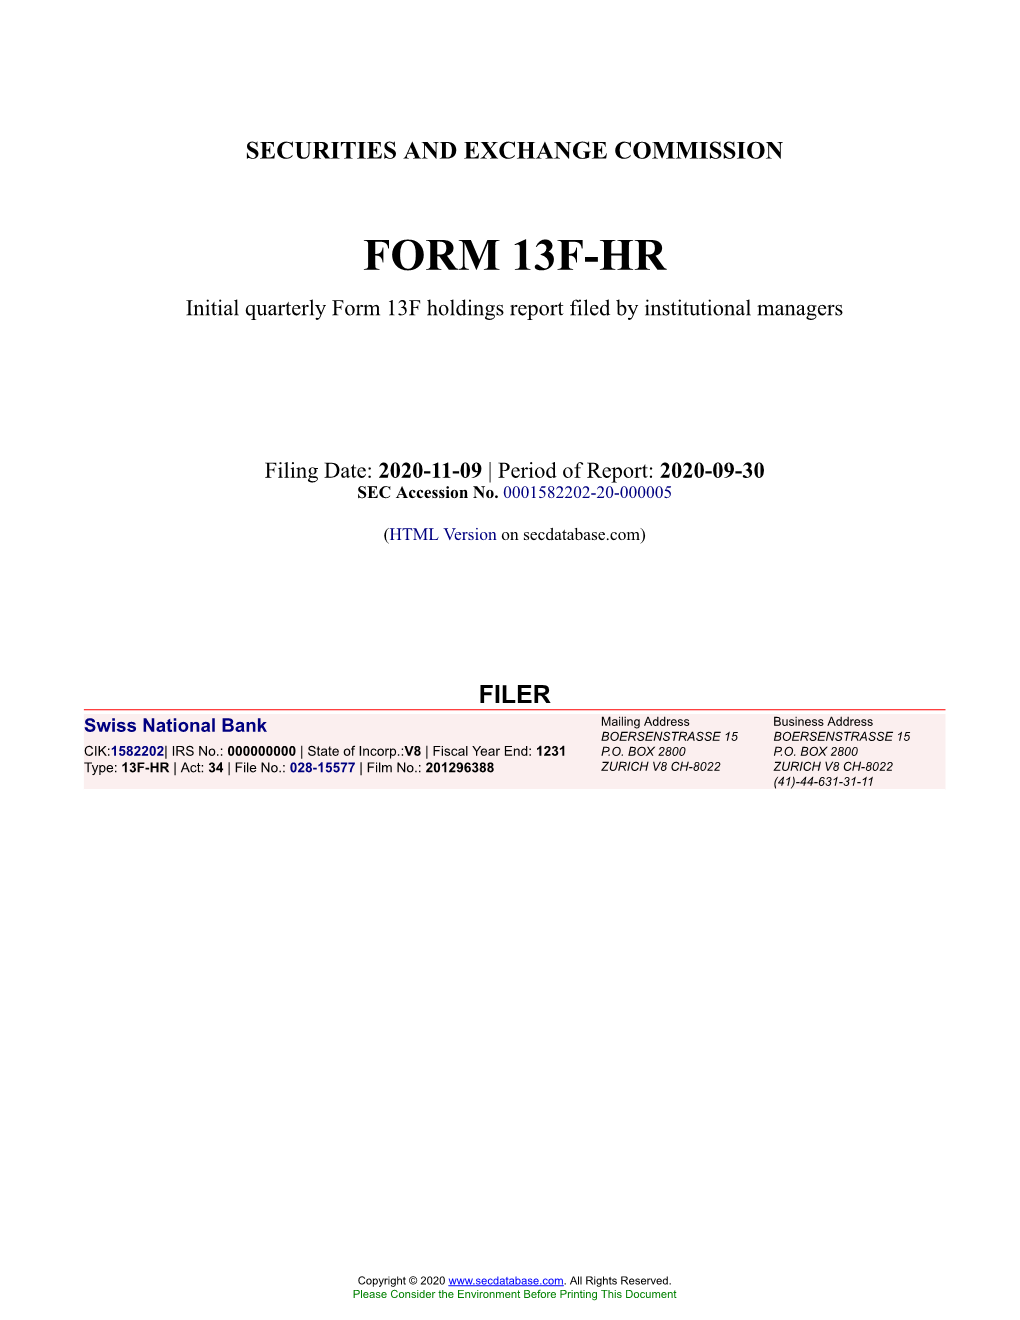 Swiss National Bank Form 13F-HR Filed 2020-11-09